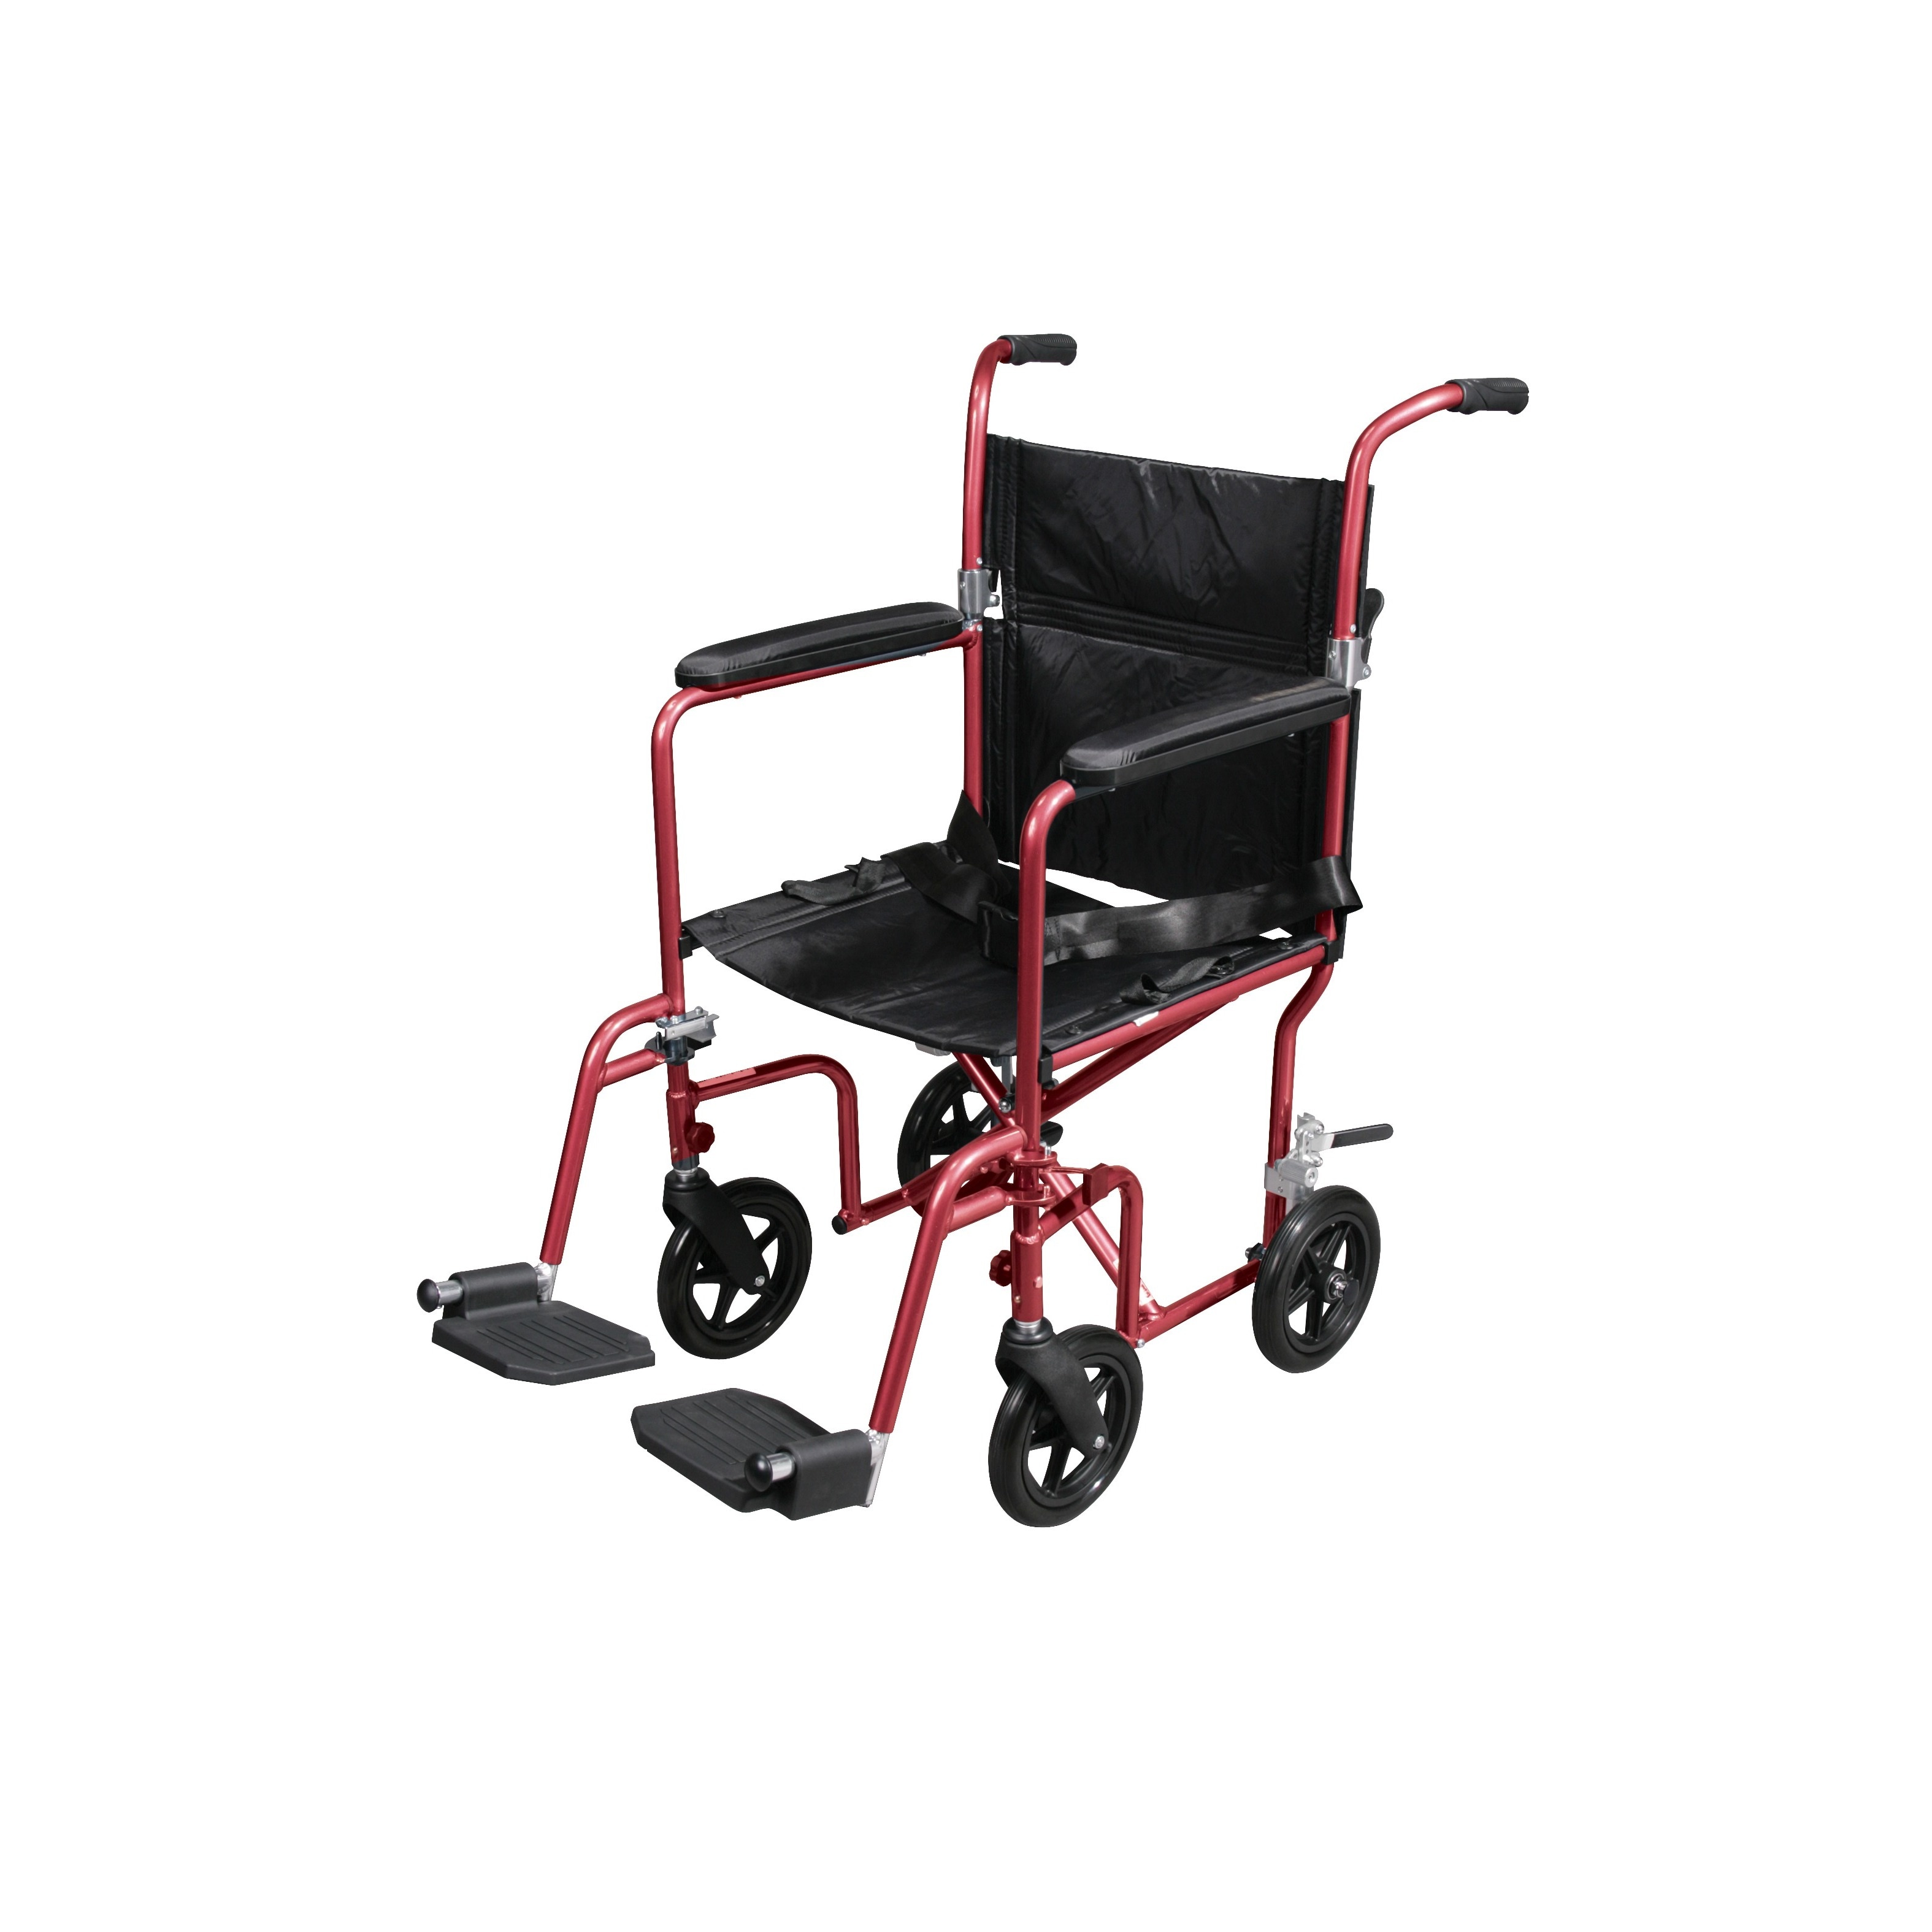 Fly Weight Lightweight Transport Wheelchair With Removable Wheels